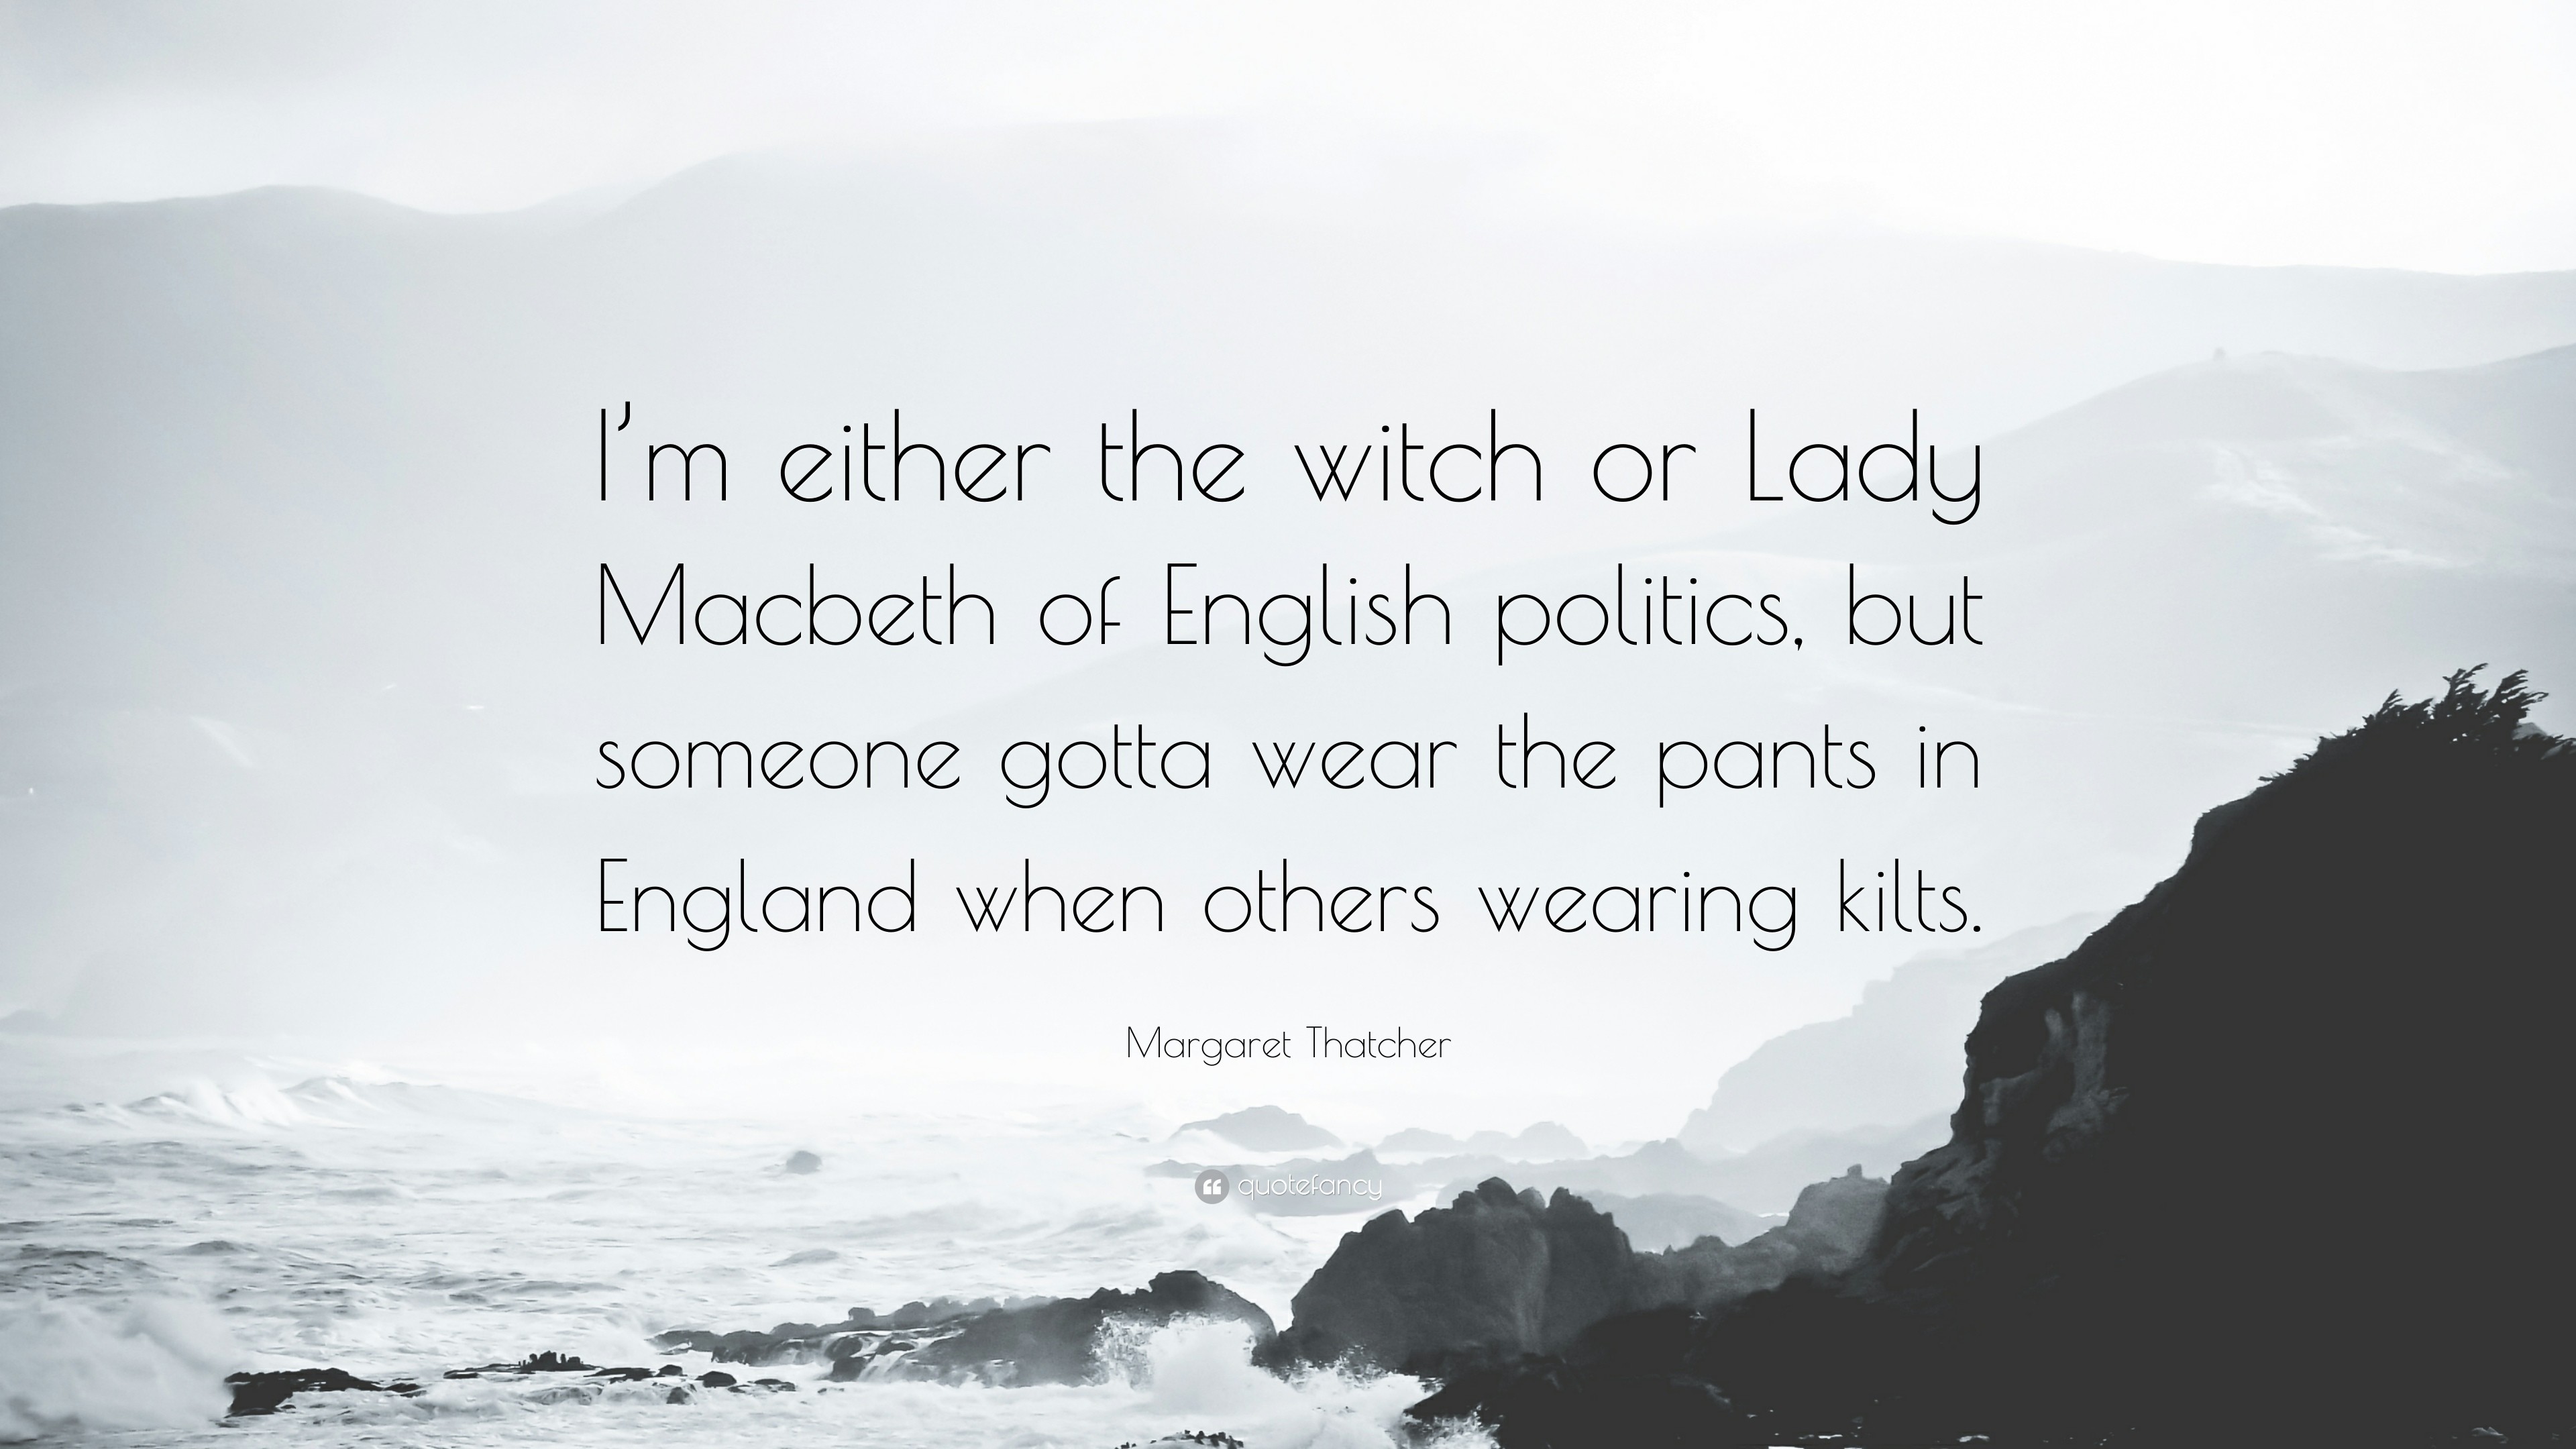 3840x2160 Margaret Thatcher Quote: “I'm either the witch or Lady Macbeth of English